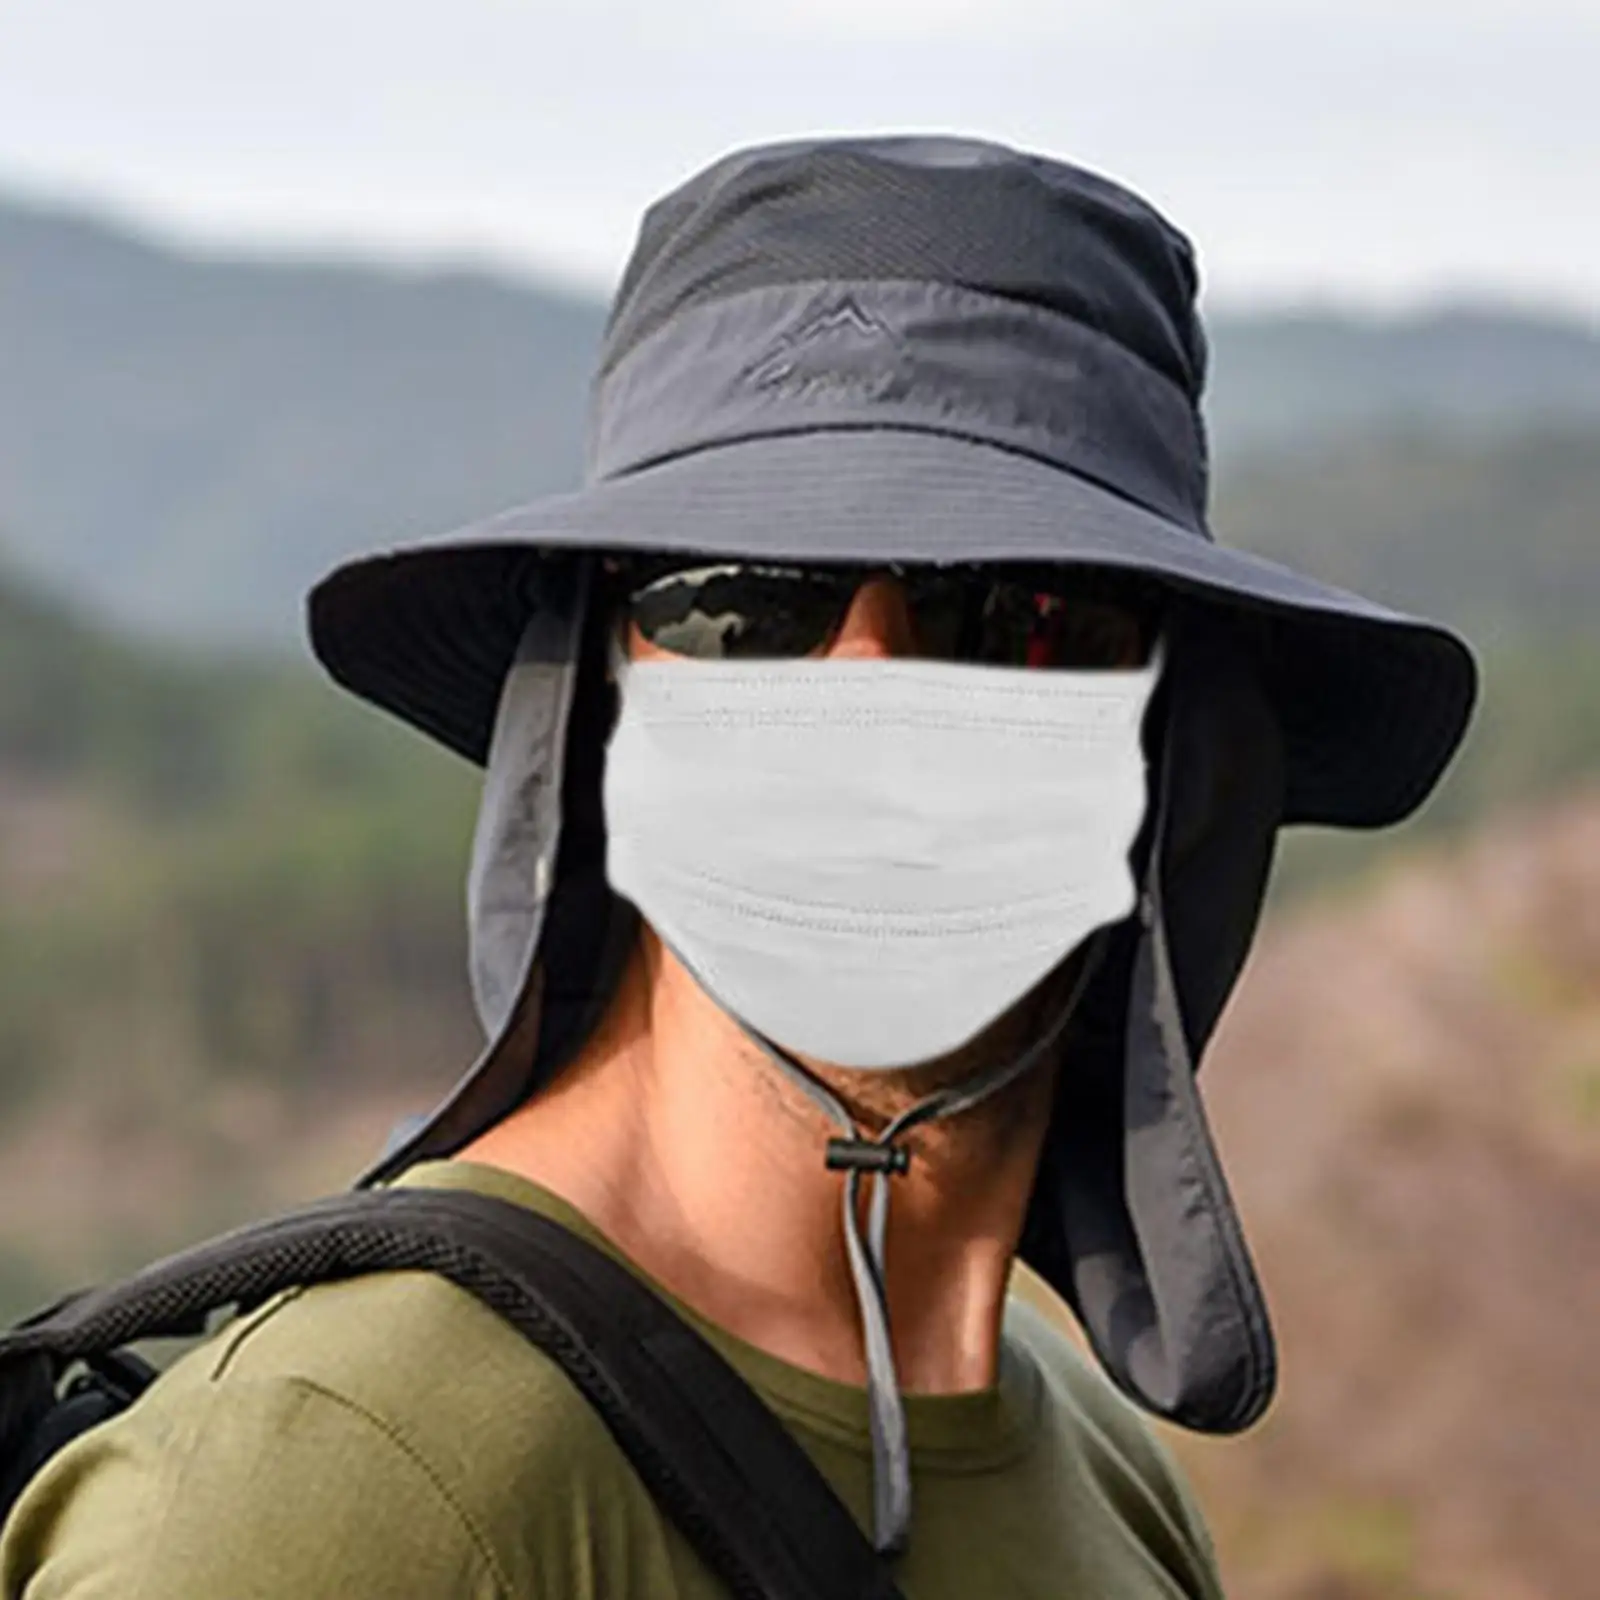 Bucket Hat with Strings Neck Protection Men Visor Breathable for Climbing